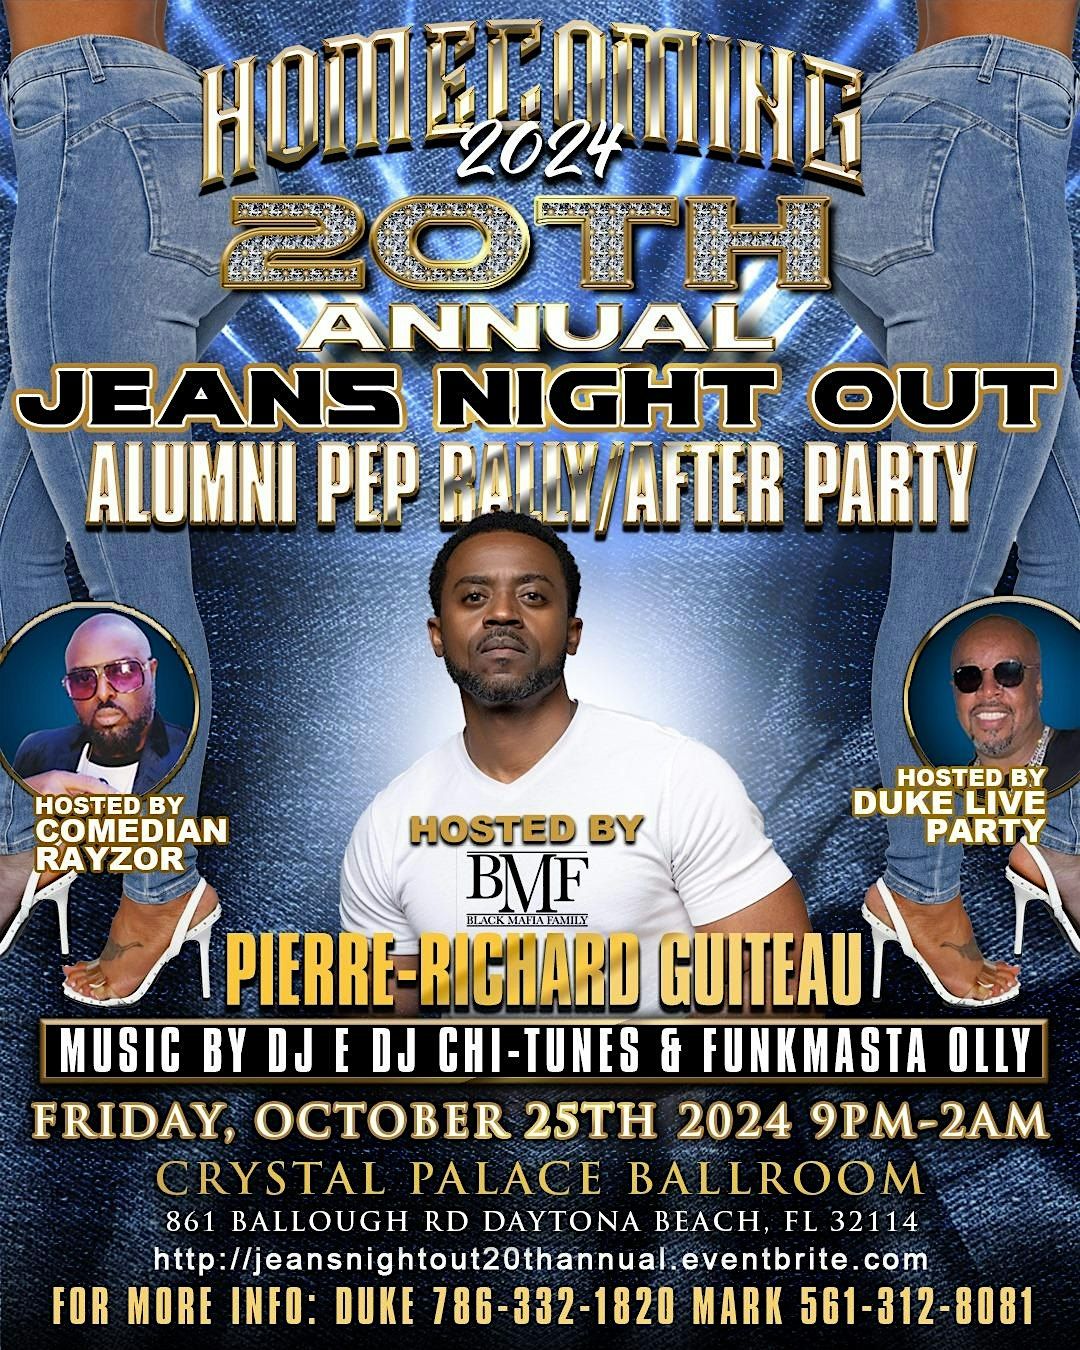 2OTH ANNUAL JEANS NIGHT OUT  HOMECOMING 2024 WEEKEND EVENTS